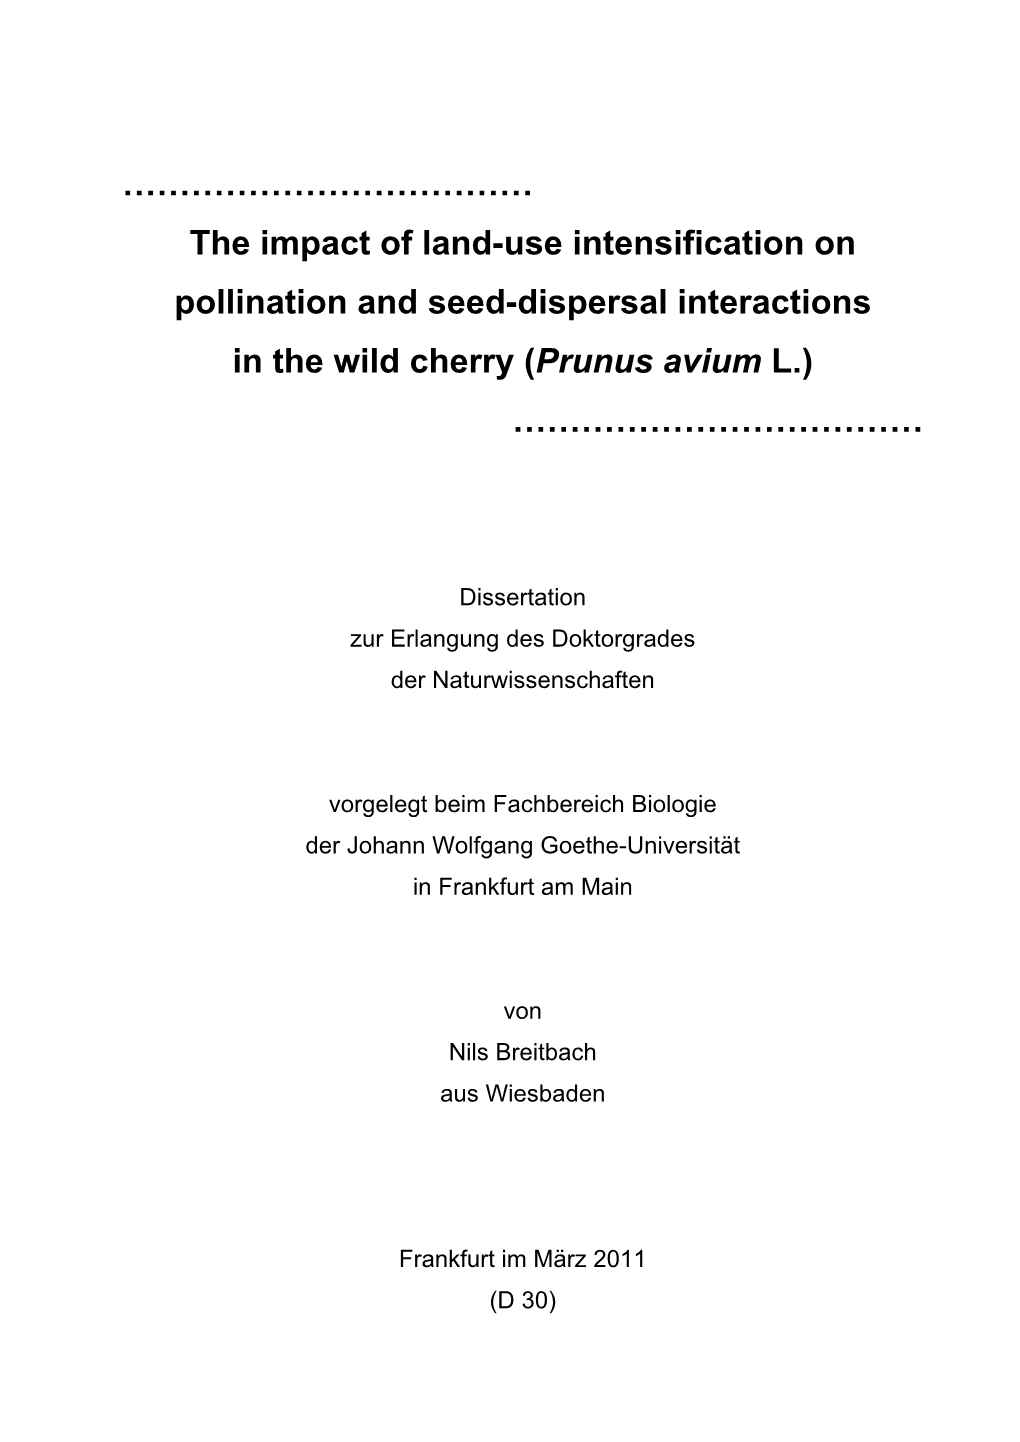 The Impact of Land-Use Intensification on Pollination and Seed-Dispersal Interactions in the Wild Cherry (Prunus Avium L.) ………………………………